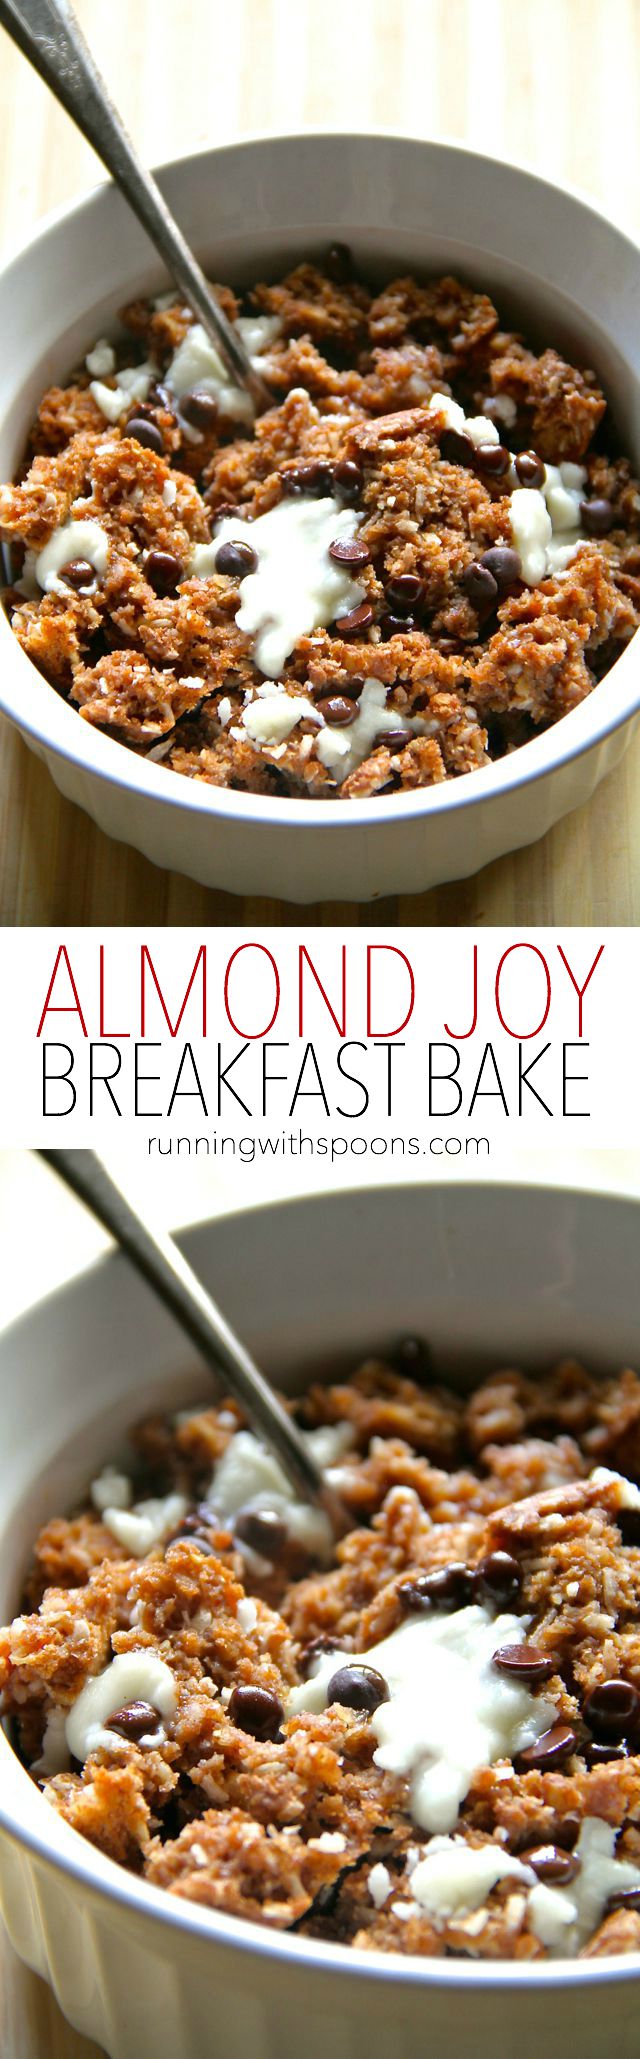 Almond Joy Breakfast Bake -- a soft and doughy oatmeal bake that combines the flavours of almonds, coconut, and chocolate in a healthy and delicious breakfast! | runningwithspoons.com #recipe #vegan #glutenfree